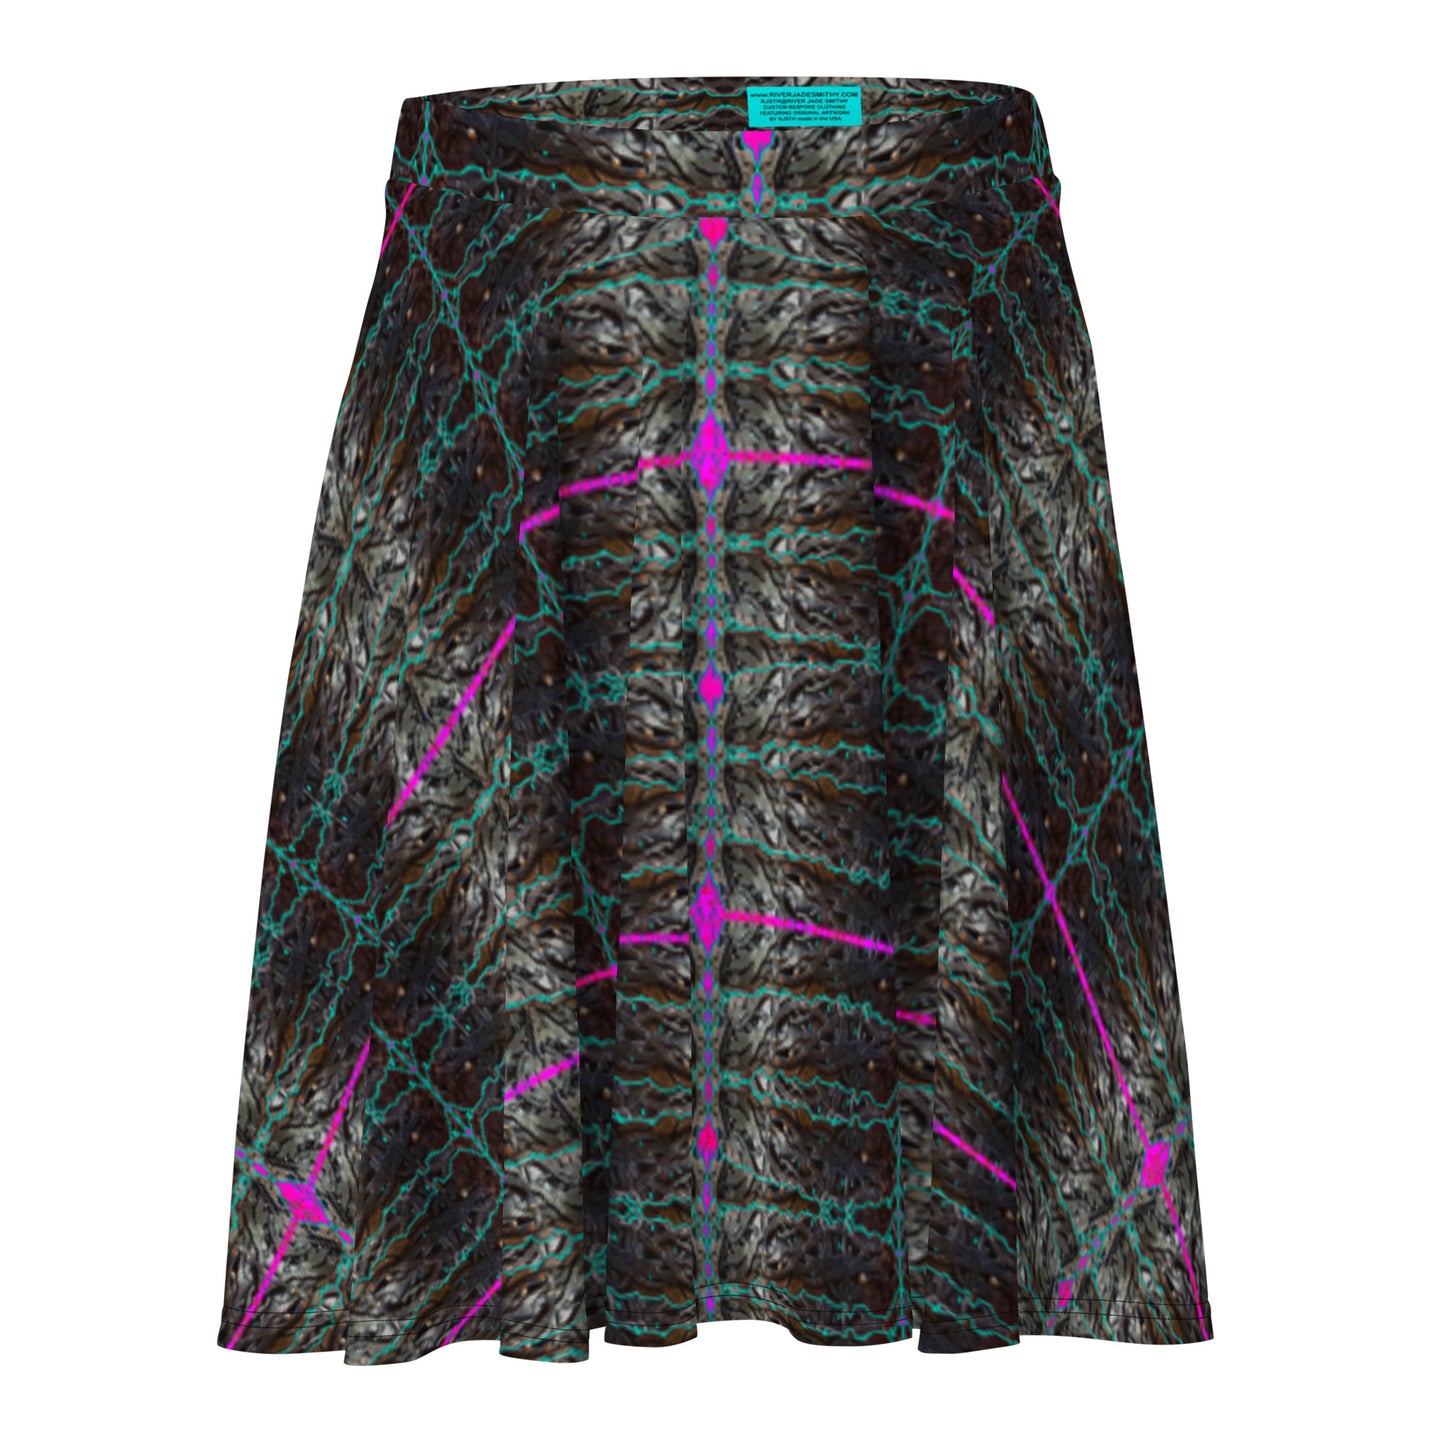 Skater Skirt (Her/They)(Tree Link Rind #8) RJSTH@Fabric#8 RJSTHW2021 RJS